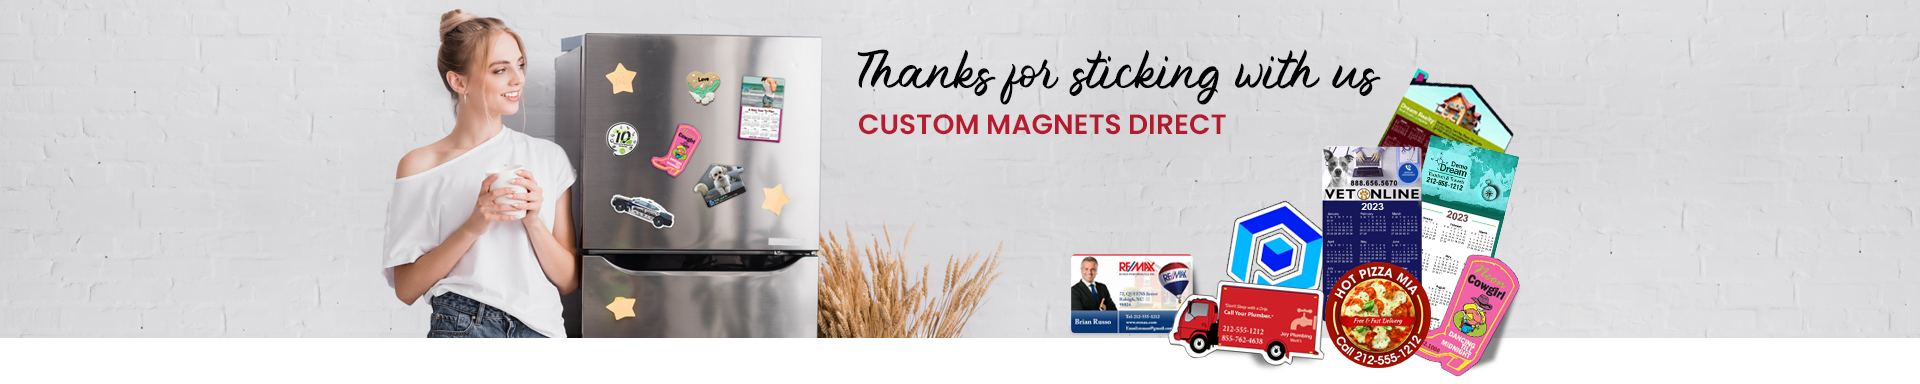 Thanks for sticking with Custom Magnets Direct